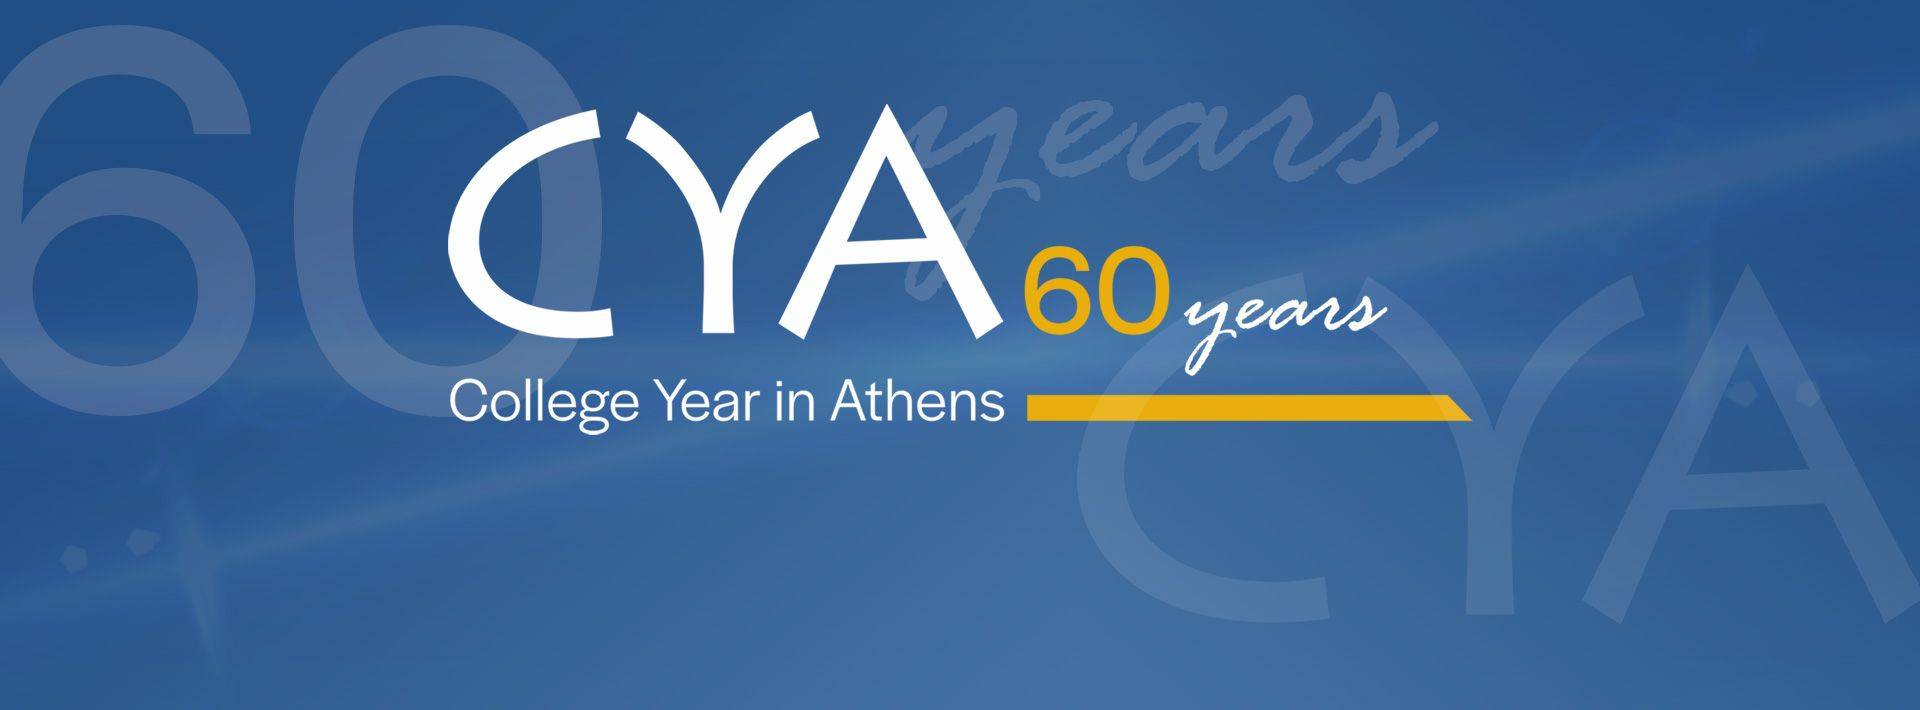 CYA - College Year in Athens 60years general web banner1920x710 blue 1